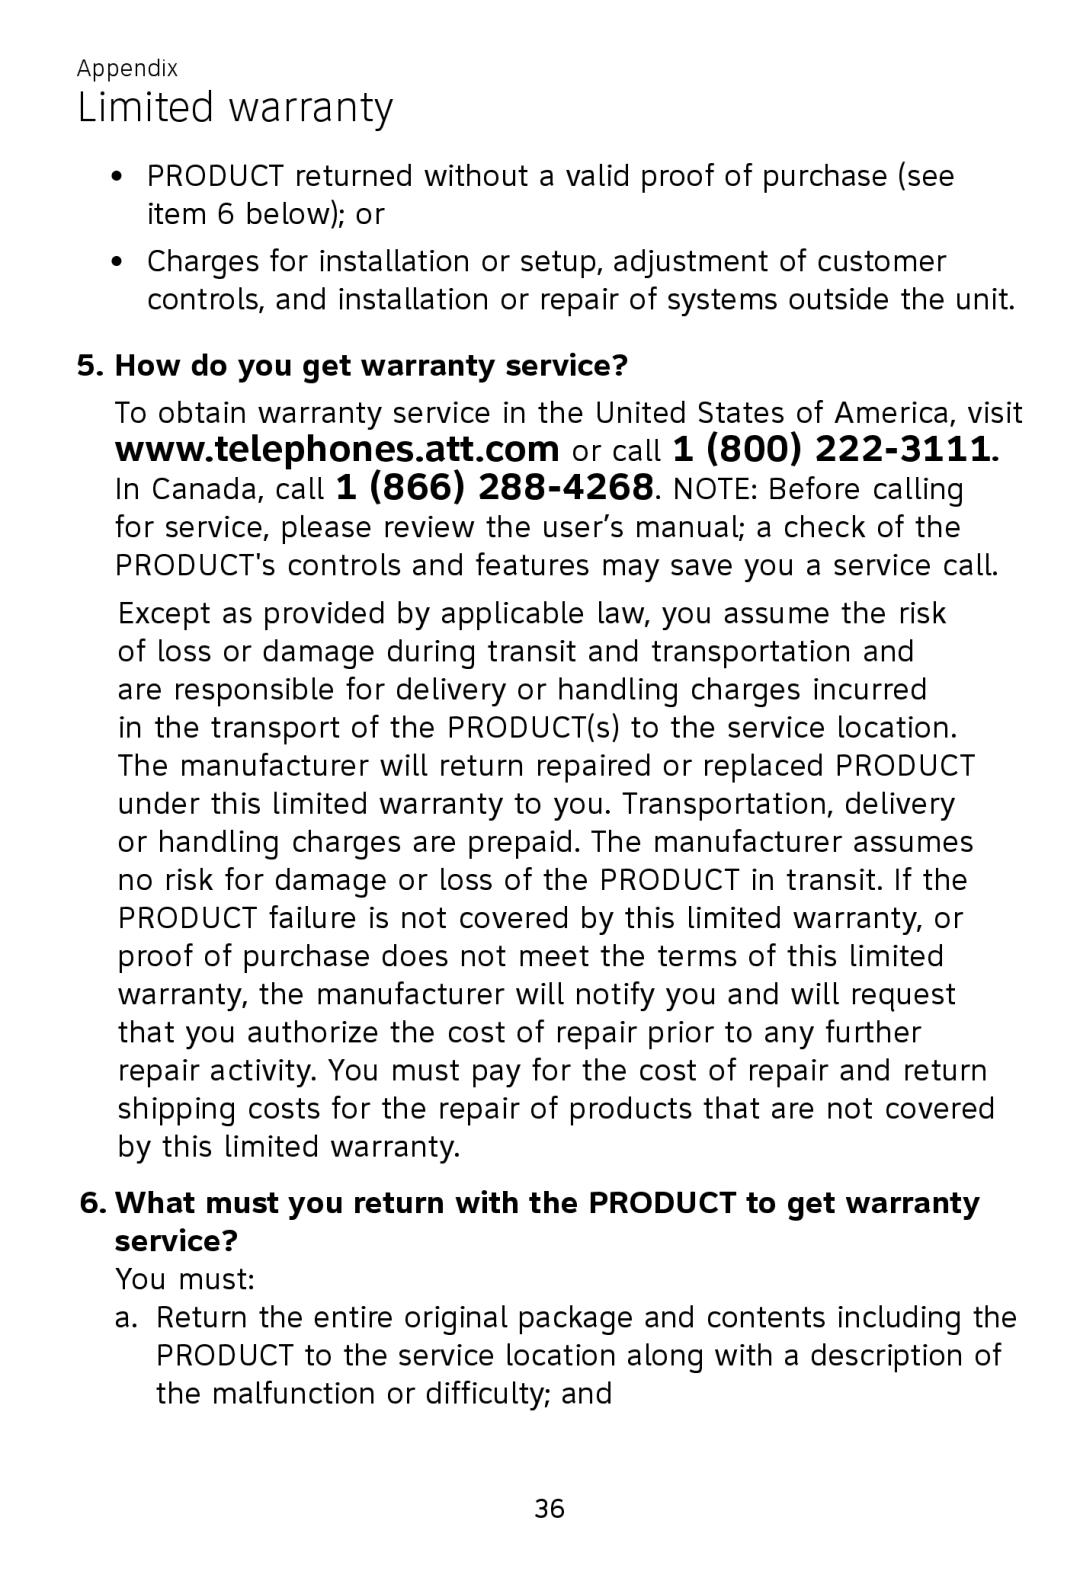 AT&T TL7700 user manual How do you get warranty service?, Limited warranty 